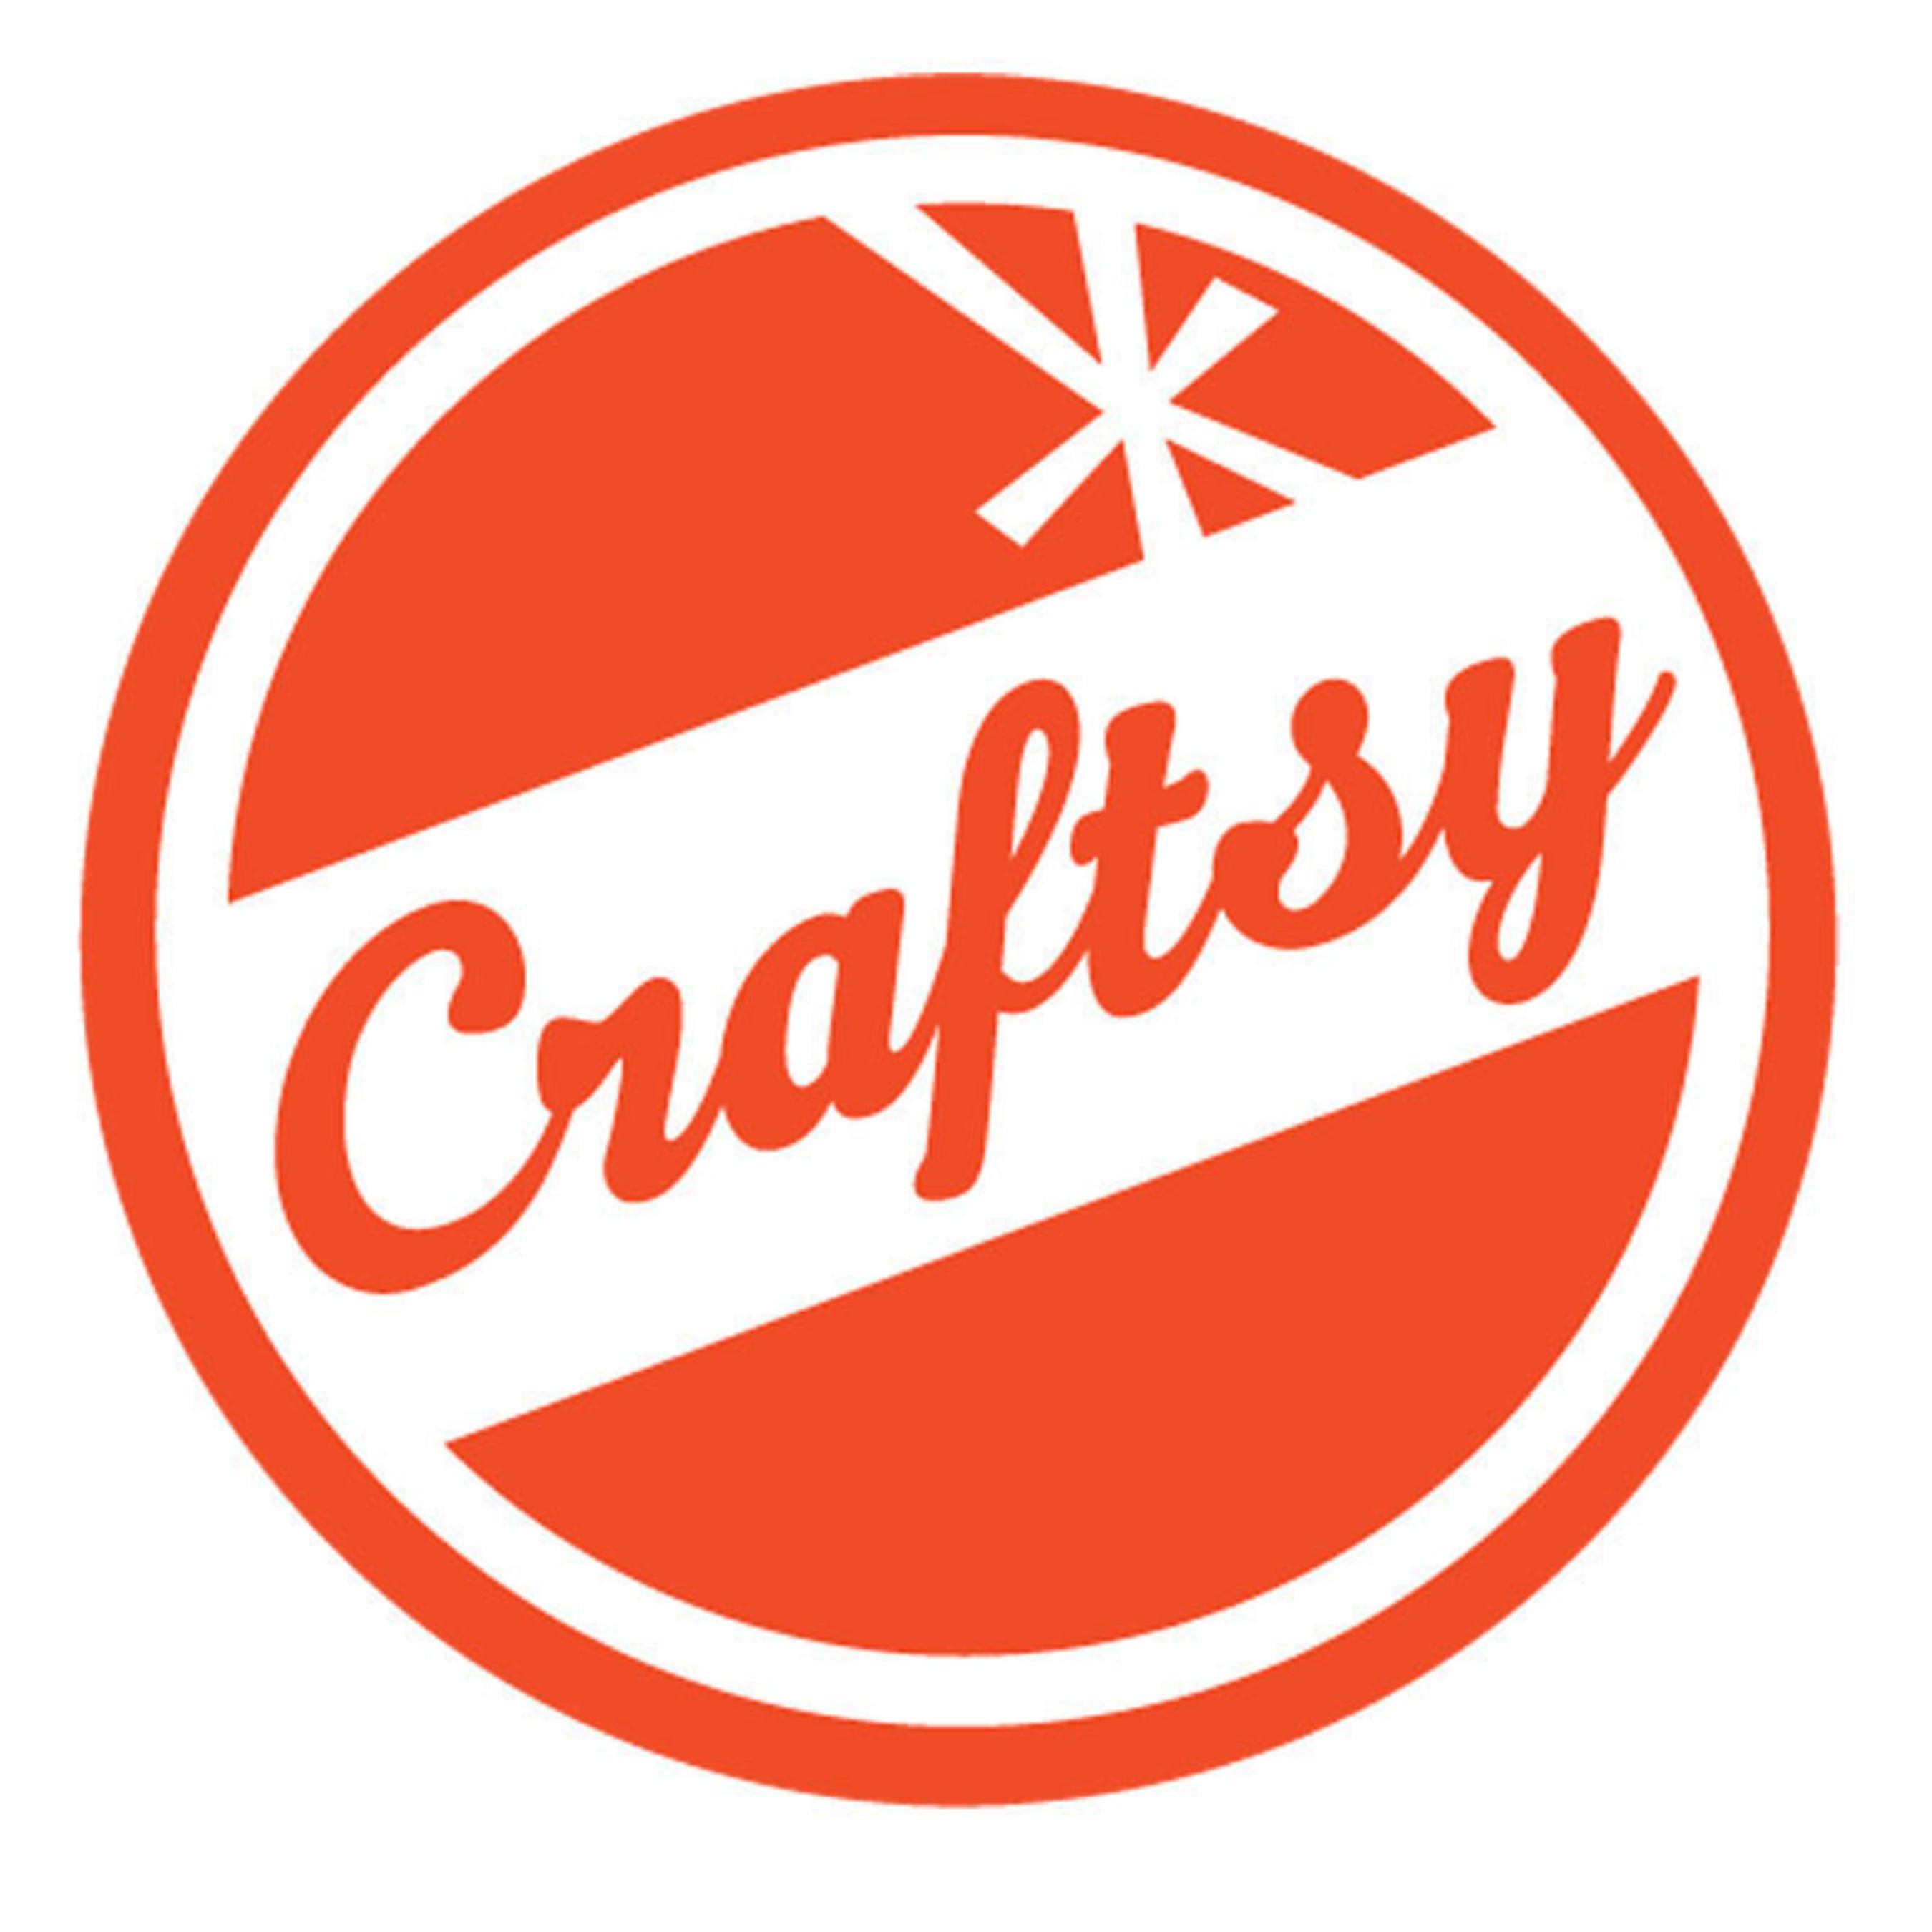 Craftsy is the preeminent online destination for passionate makers to learn, create, and share.(PRNewsFoto/Craftsy) (PRNewsFoto/CRAFTSY)